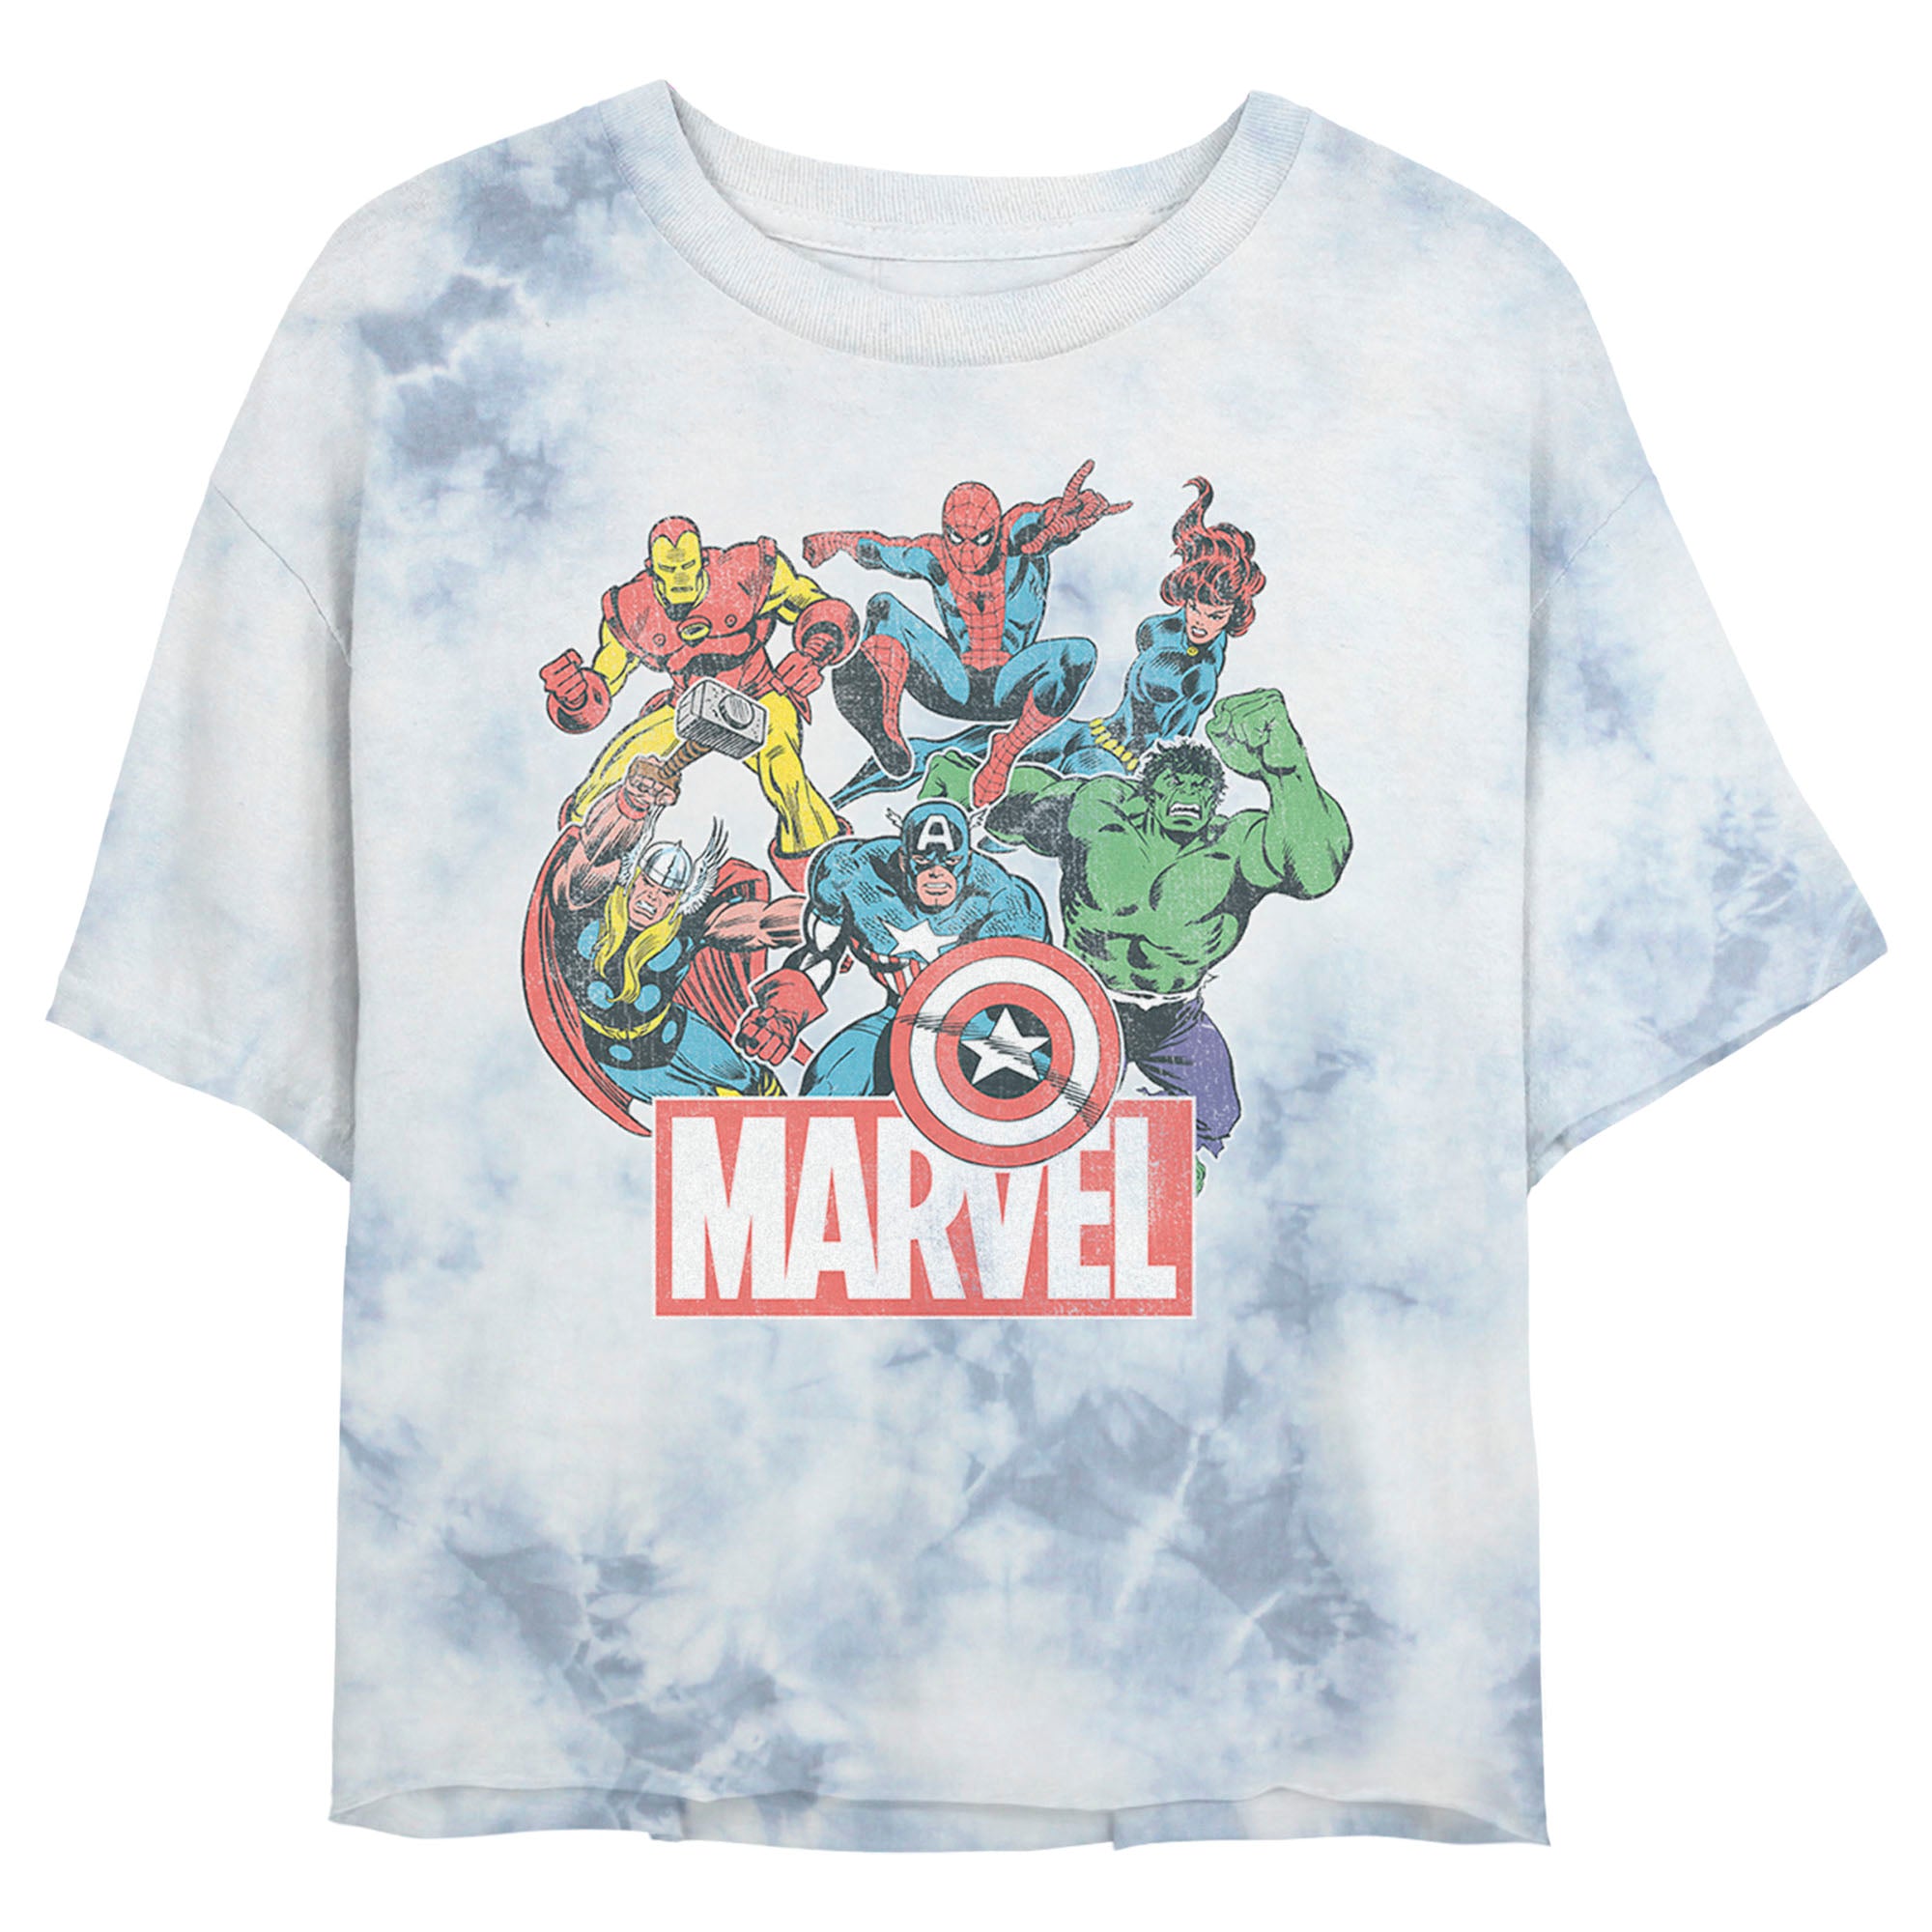 Shop Avengers: The Mouse the – Box Apparel Our Marvel Merch Today Kids Join Line